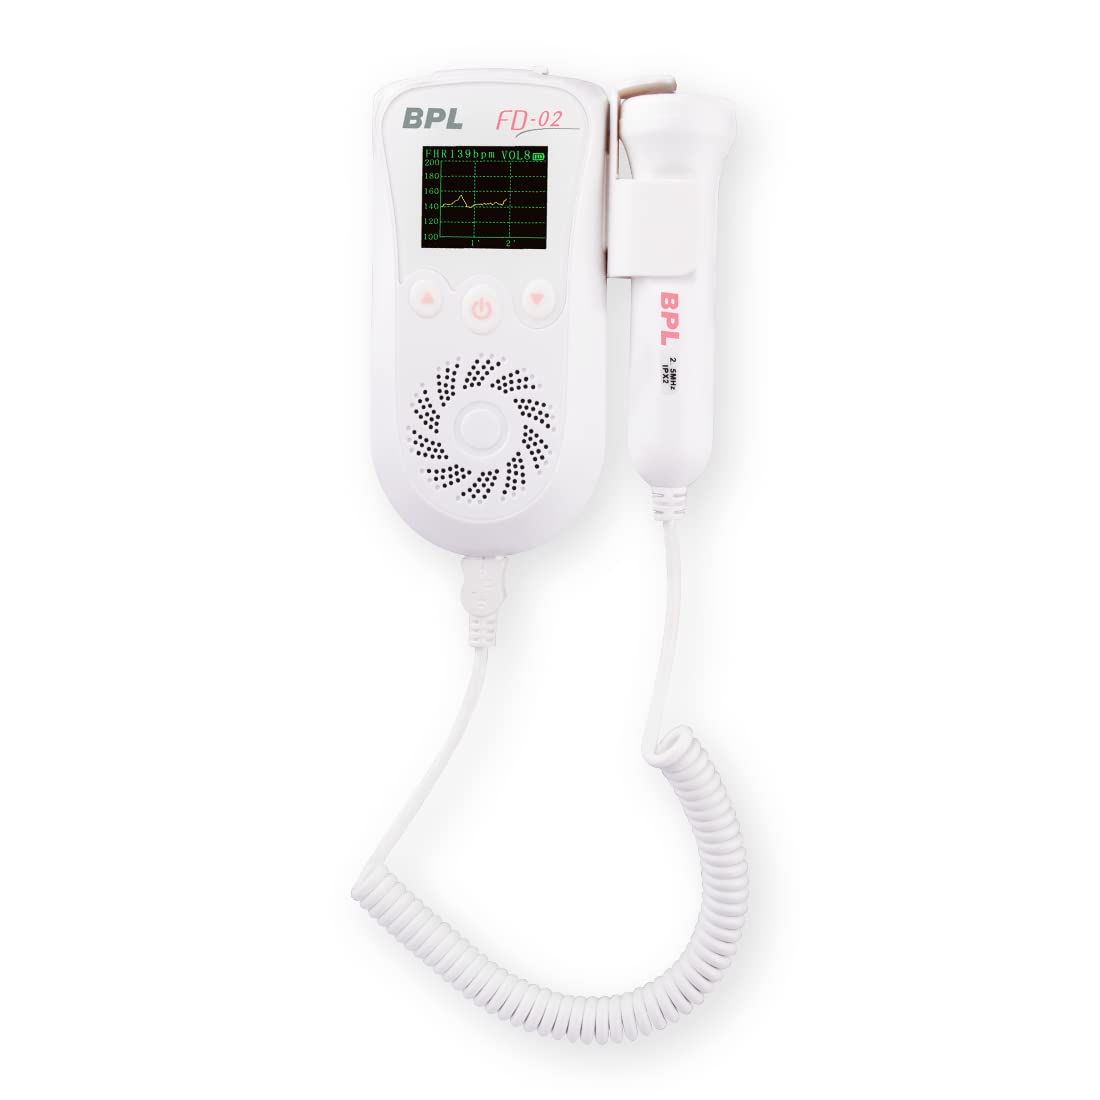 BPL FD-02 Baby Heart Rate Detection Monitoring Machine Portable with in-Built Speaker Ultrasonic Fetal Doppler with USB Charging